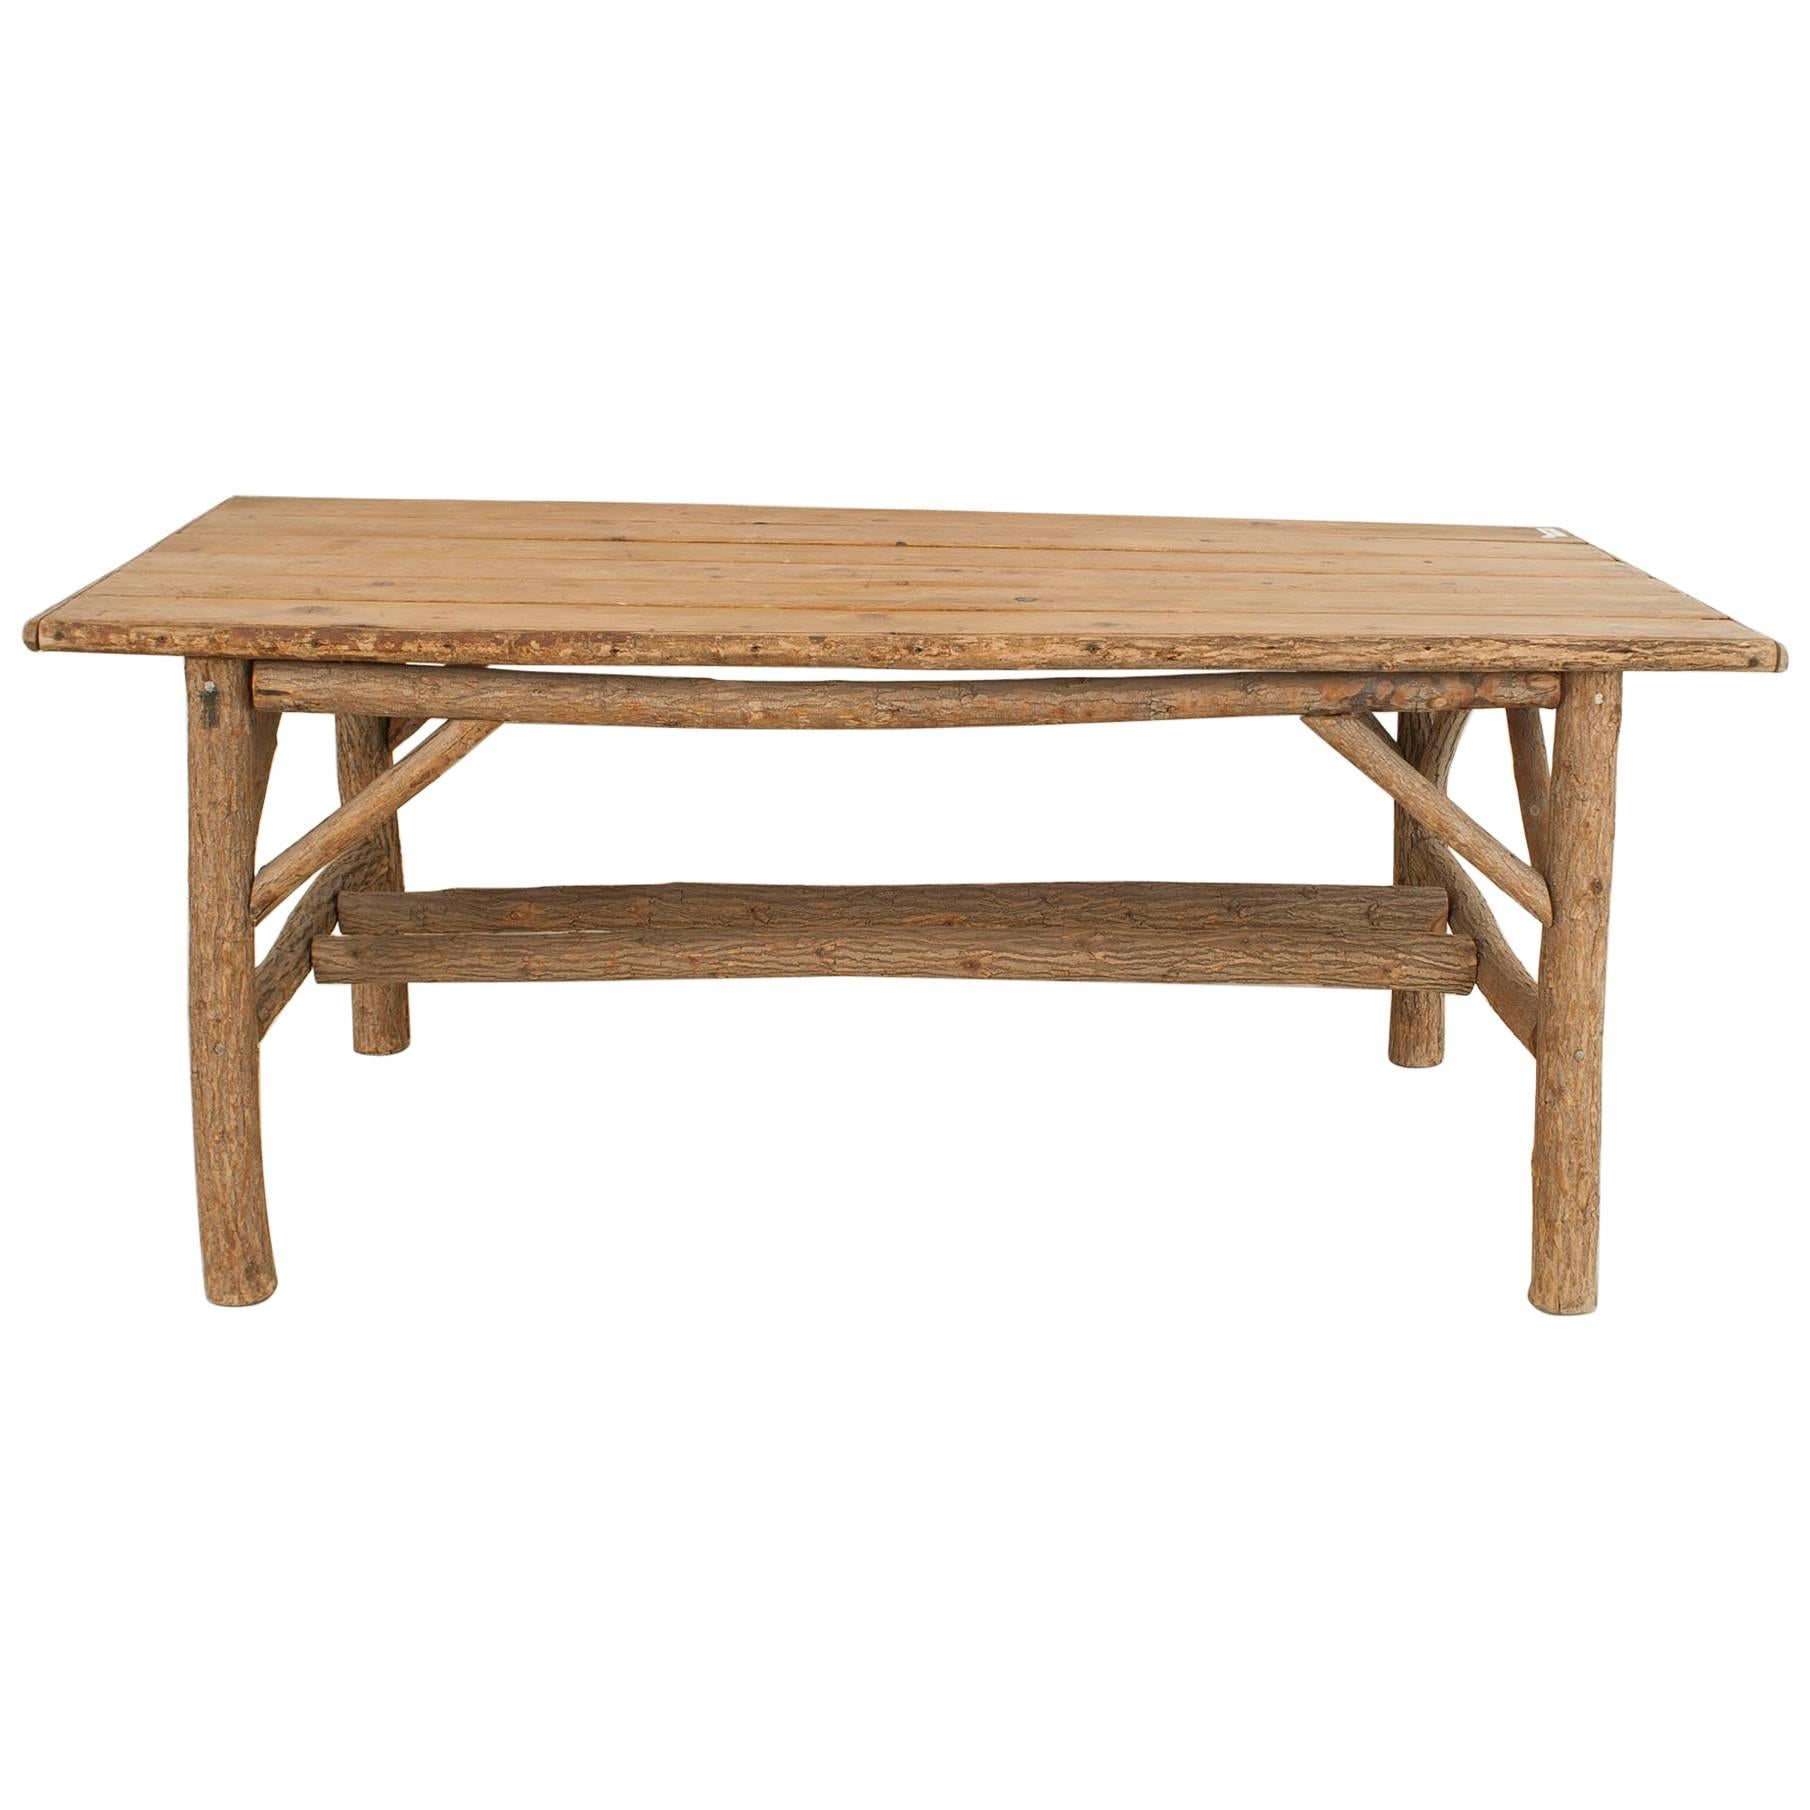 Rustic American Dining Table